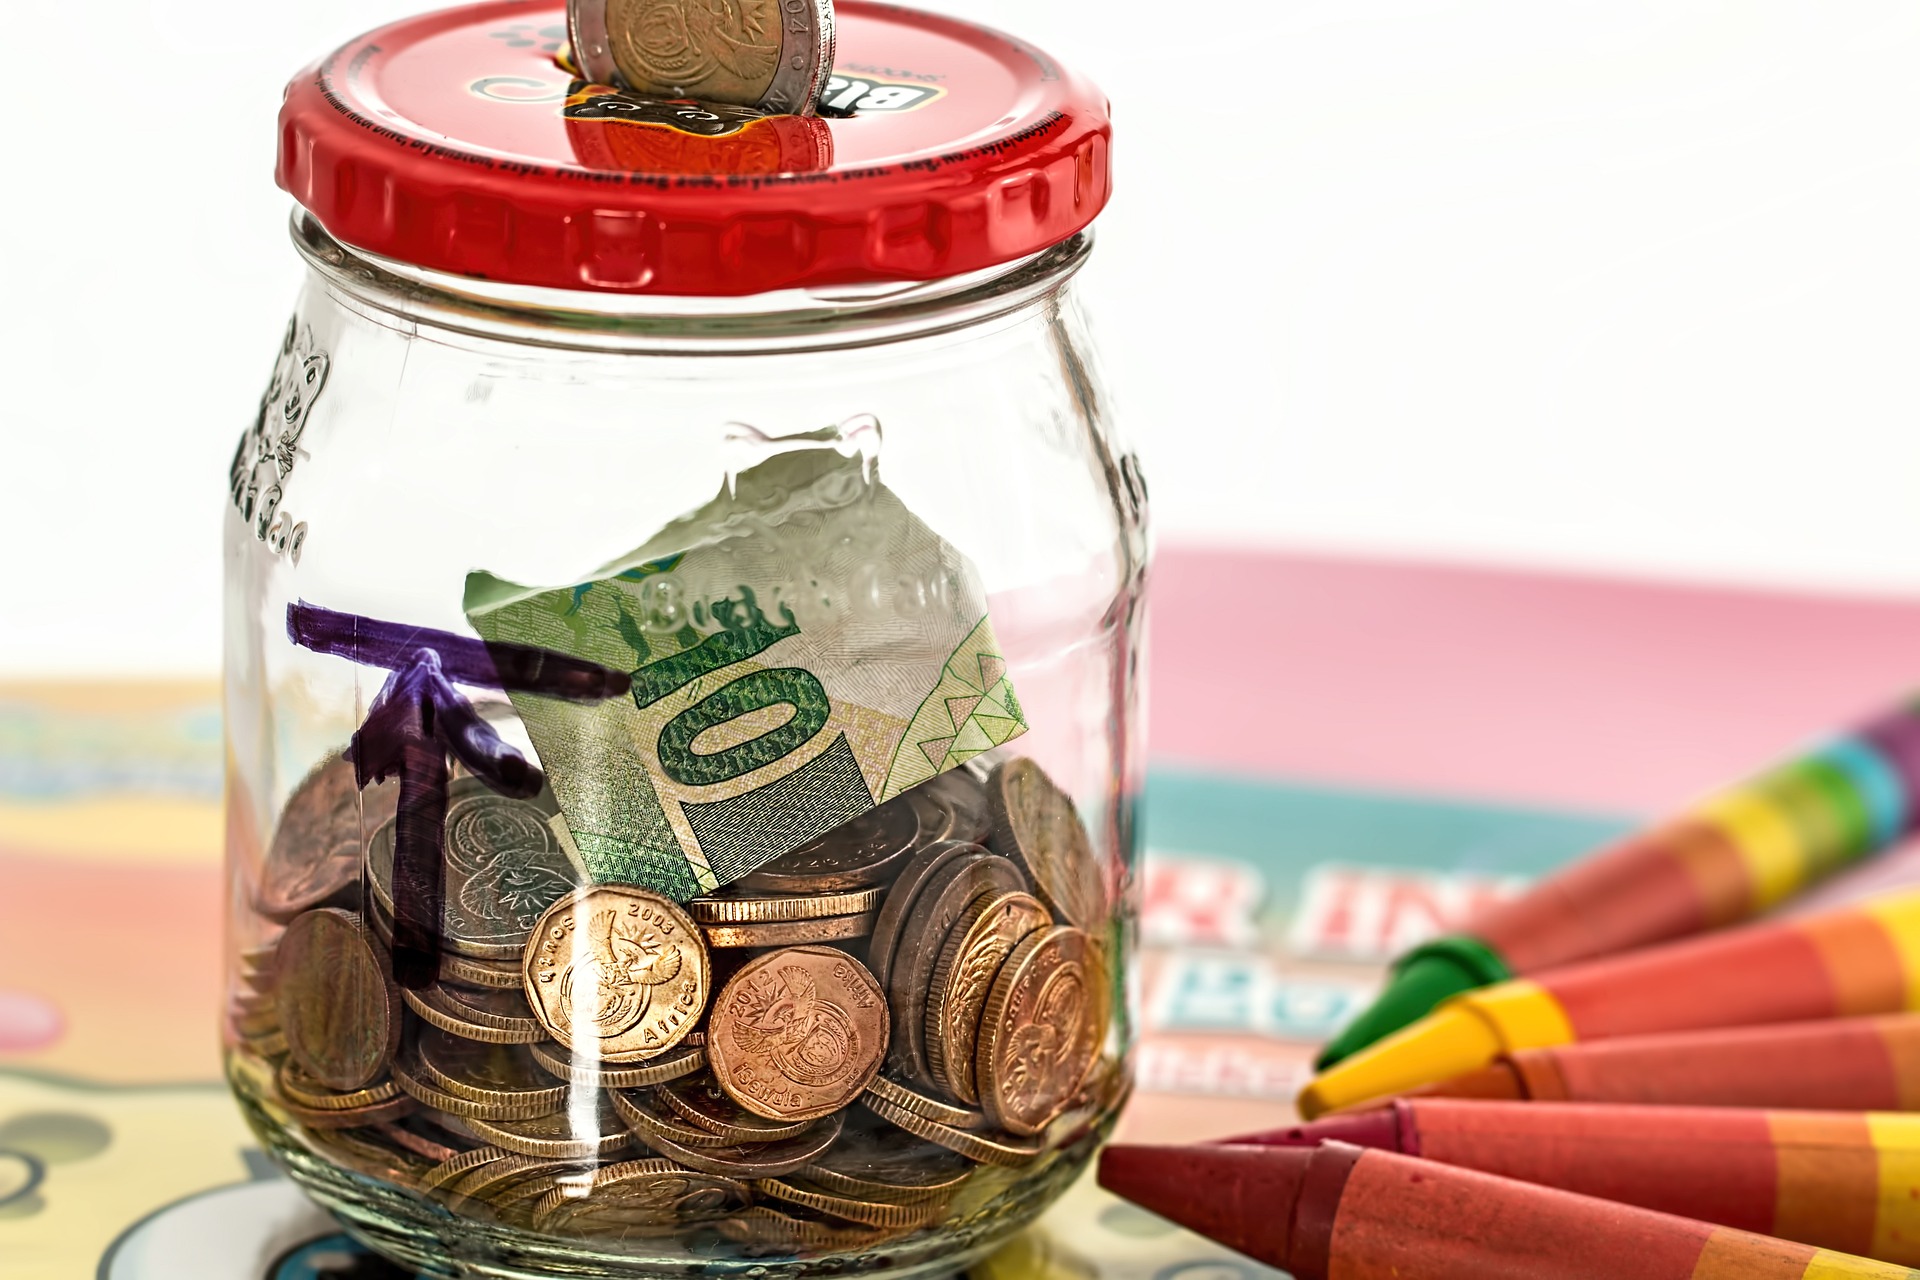 A glass jar with a red lid containing money, as if a piggy bank. There are multi-colour crayons to the right of the jar.